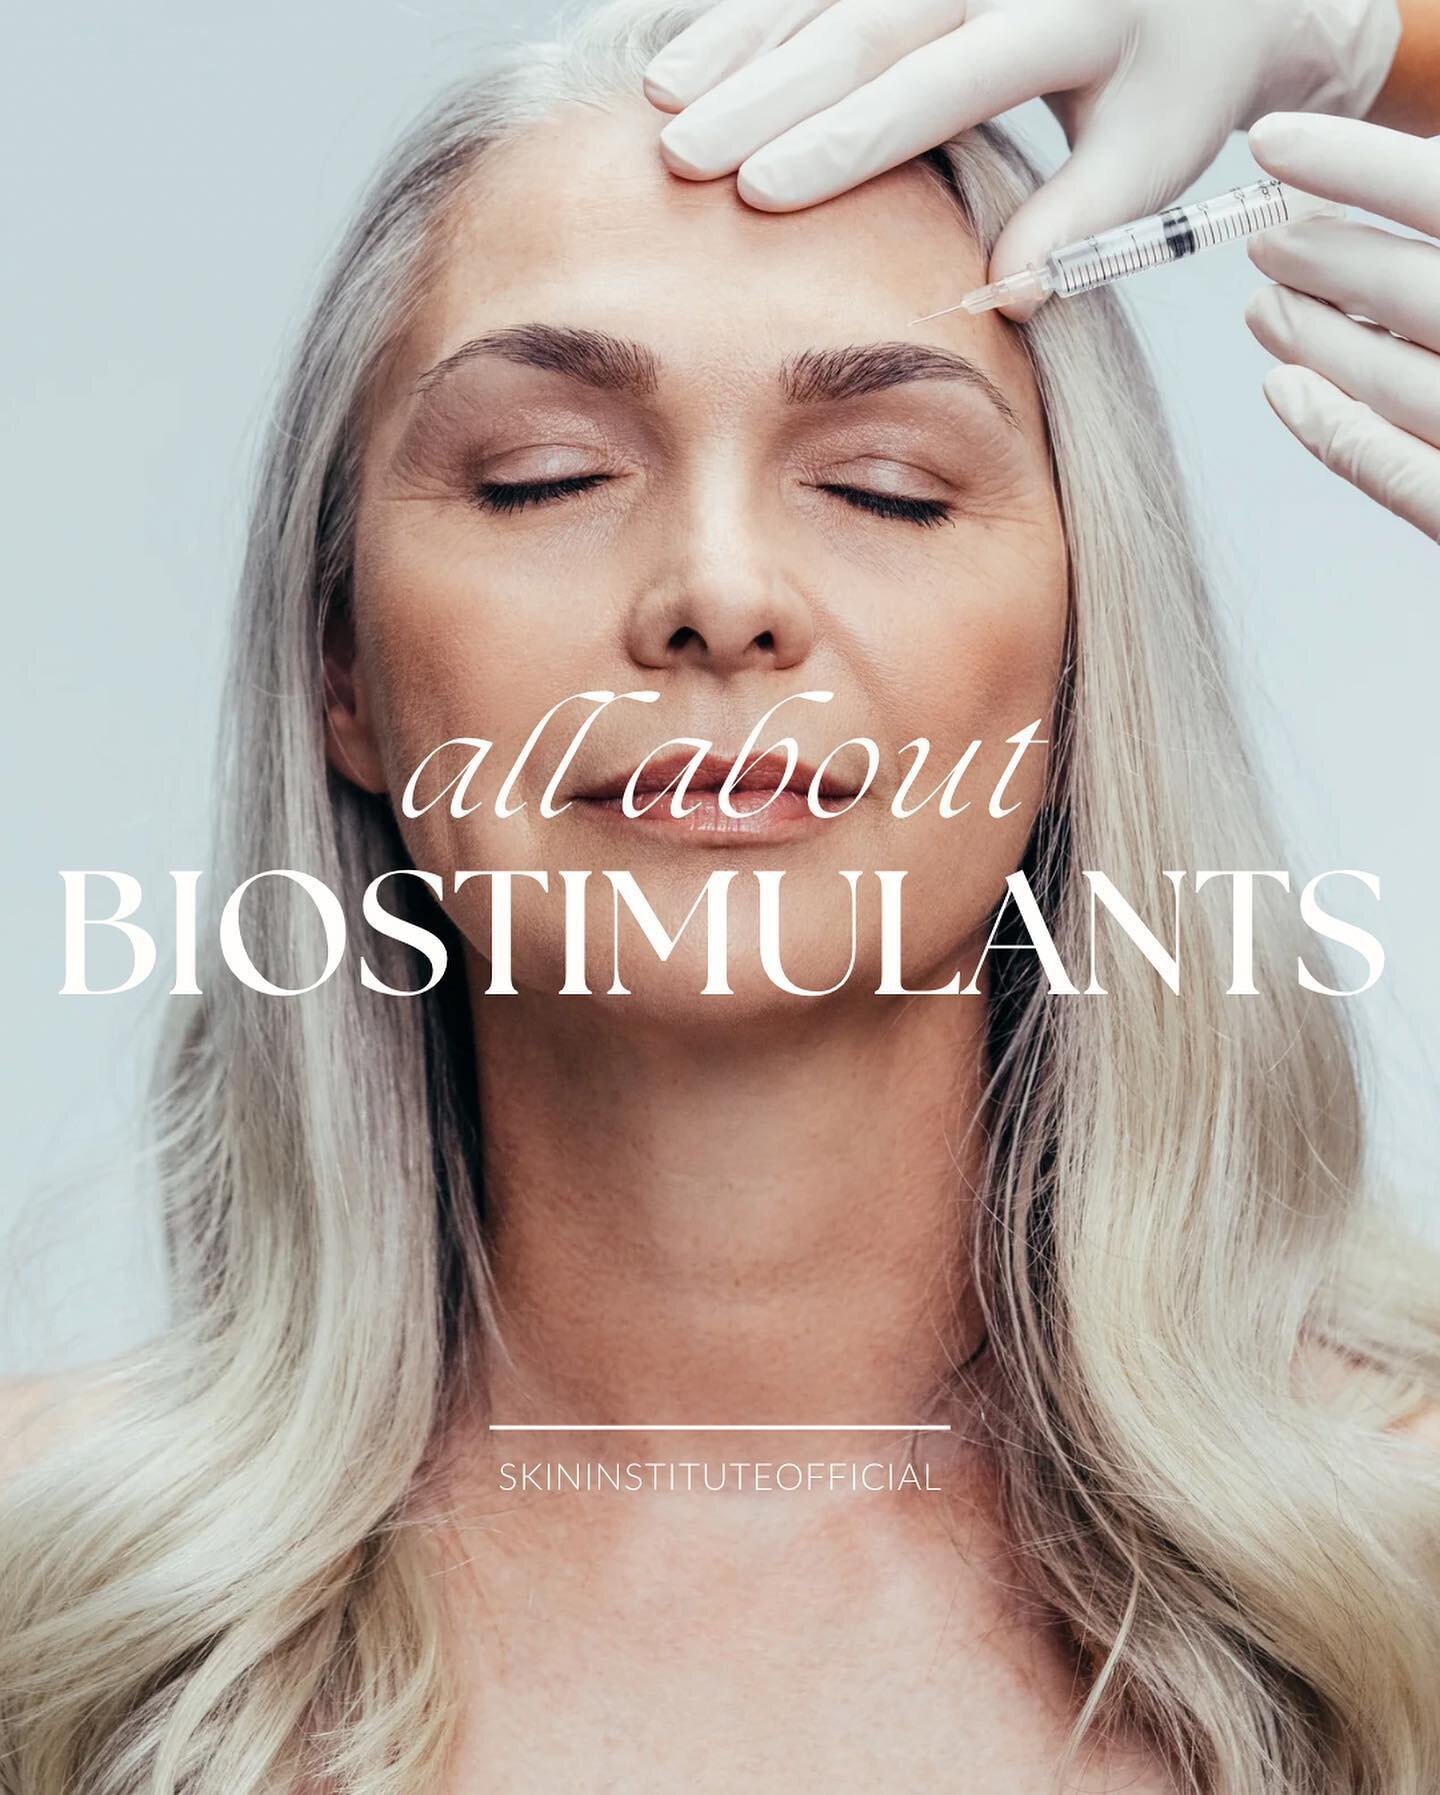 Restore, regenerate, and rejuvenate with biostimulant injections ✨

Radiesse and Sculptra offer safe and effective treatments for restoring volume, improving skin texture, and stimulating collagen production. 

SWIPE ➡️ to learn more.